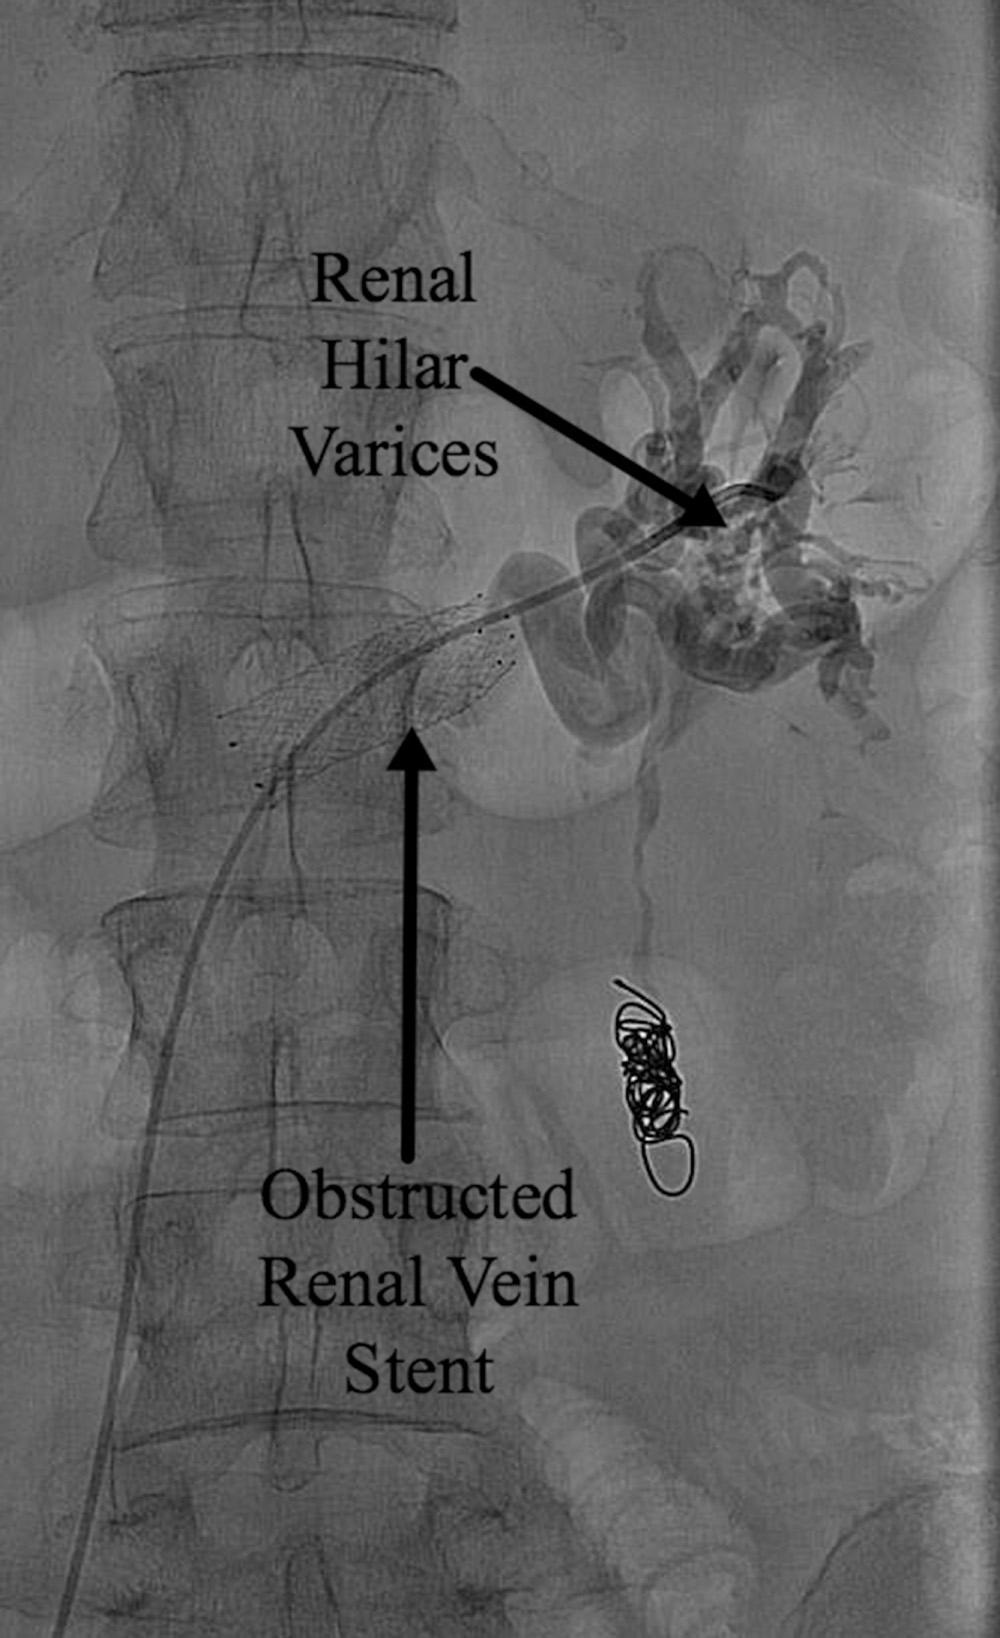 Fig. 21.9, Left renal vein obstruction. The renal vein stent is obstructed with limited collateral outflow from previous left ovarian embolization. There is direct pressure transmission to the renal hilum with the formation of varices and symptoms of flank pain and hematuria. A similar pattern may occur in uncompensated left renal vein compression (nutcracker syndrome).